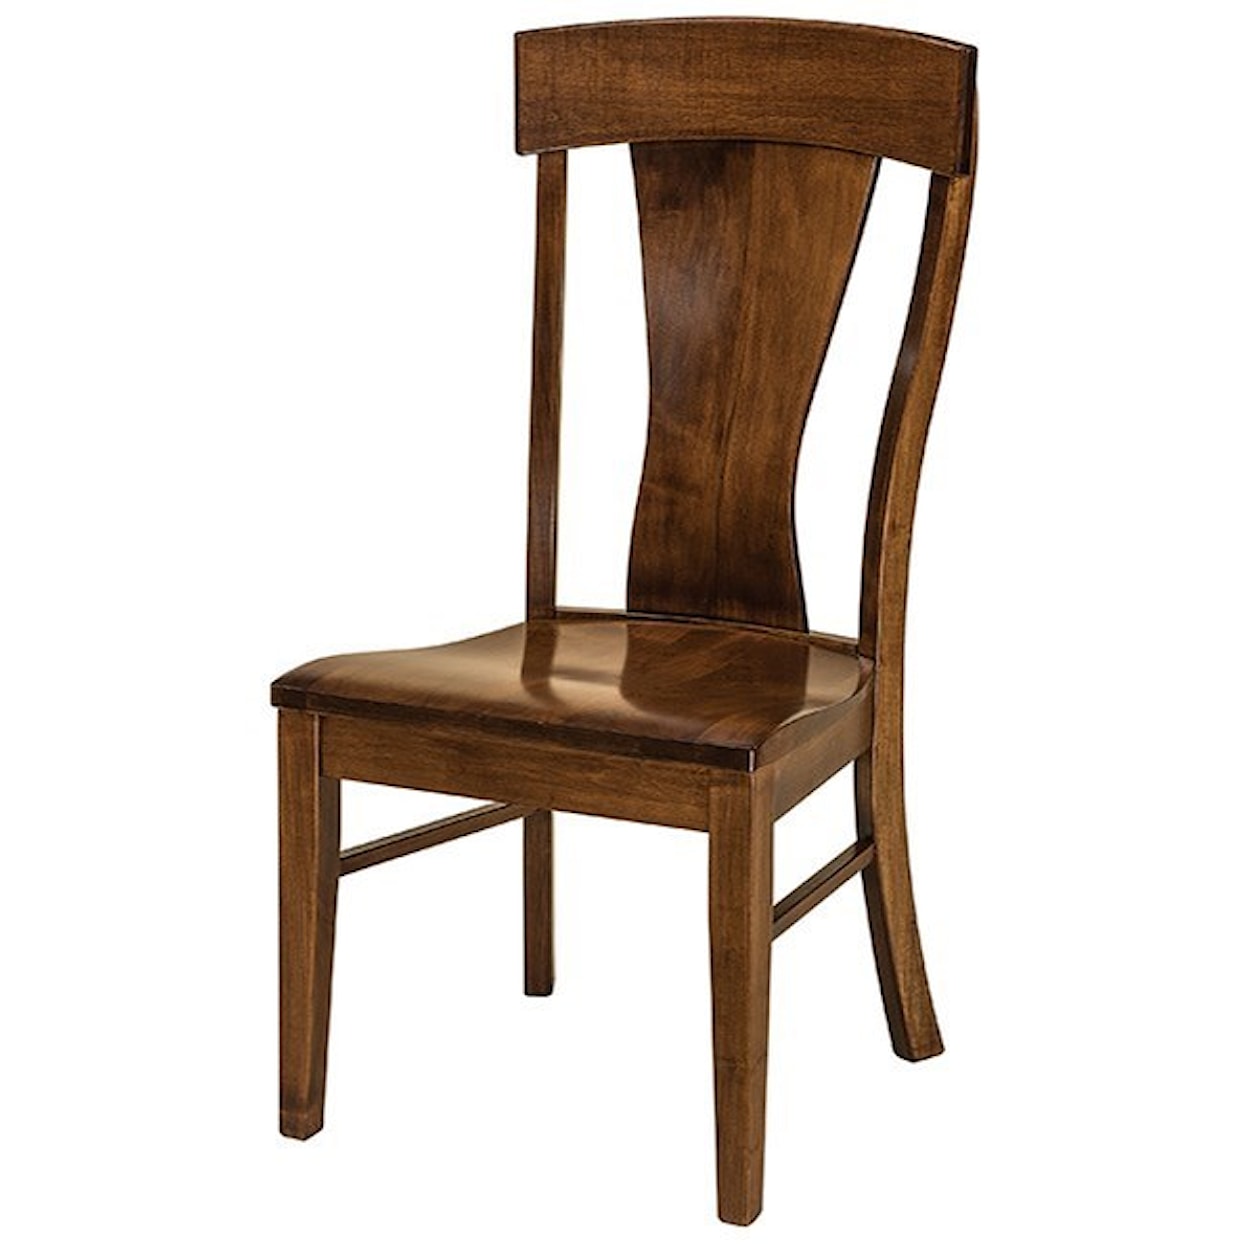 F&N Woodworking Ramsey Side Chair